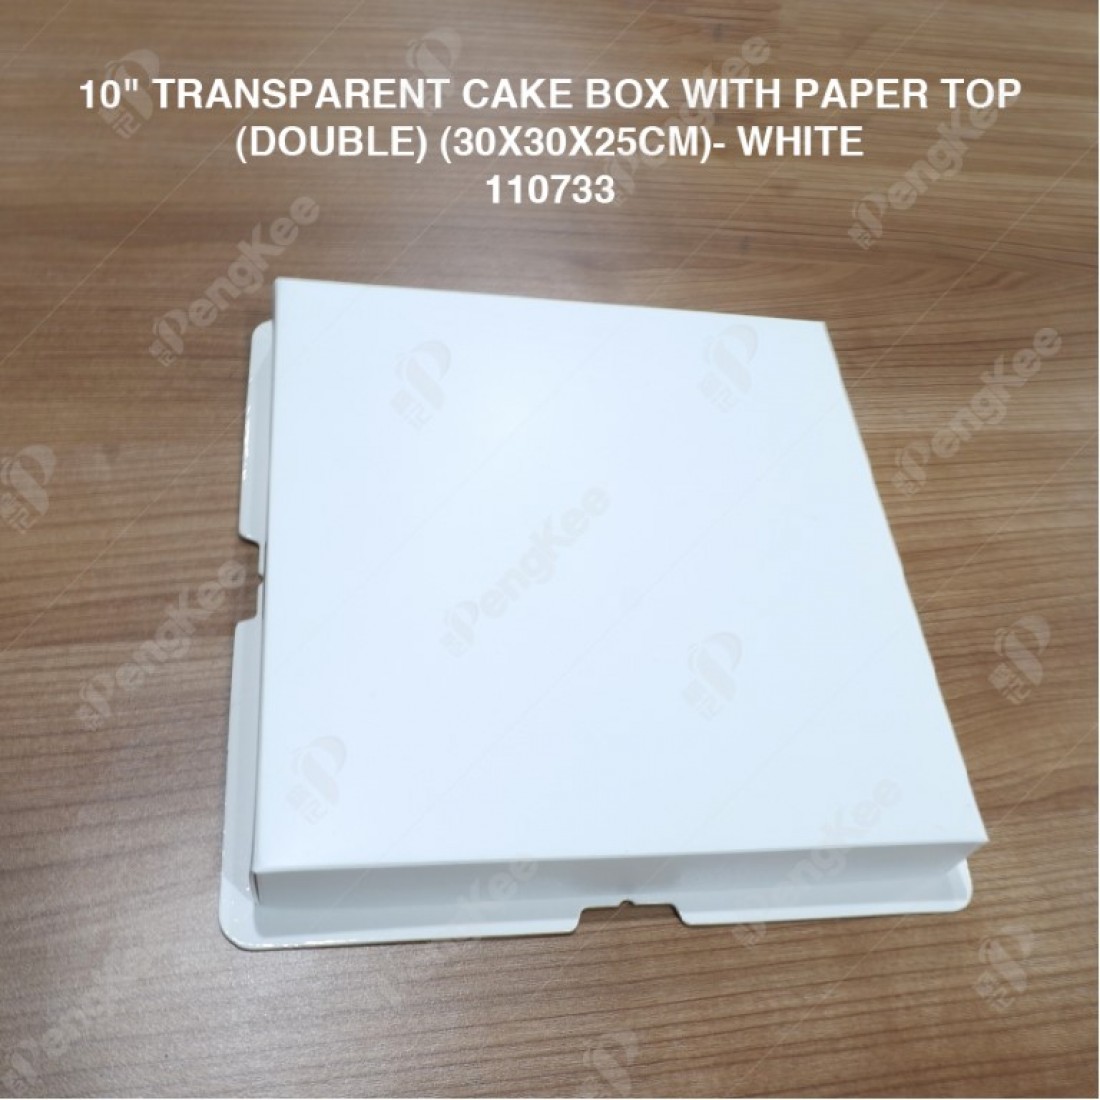 10" TRANSPARENT CAKE BOX WITH PAPER TOP(DOUBLE) (30*30*25CM)- WHITE